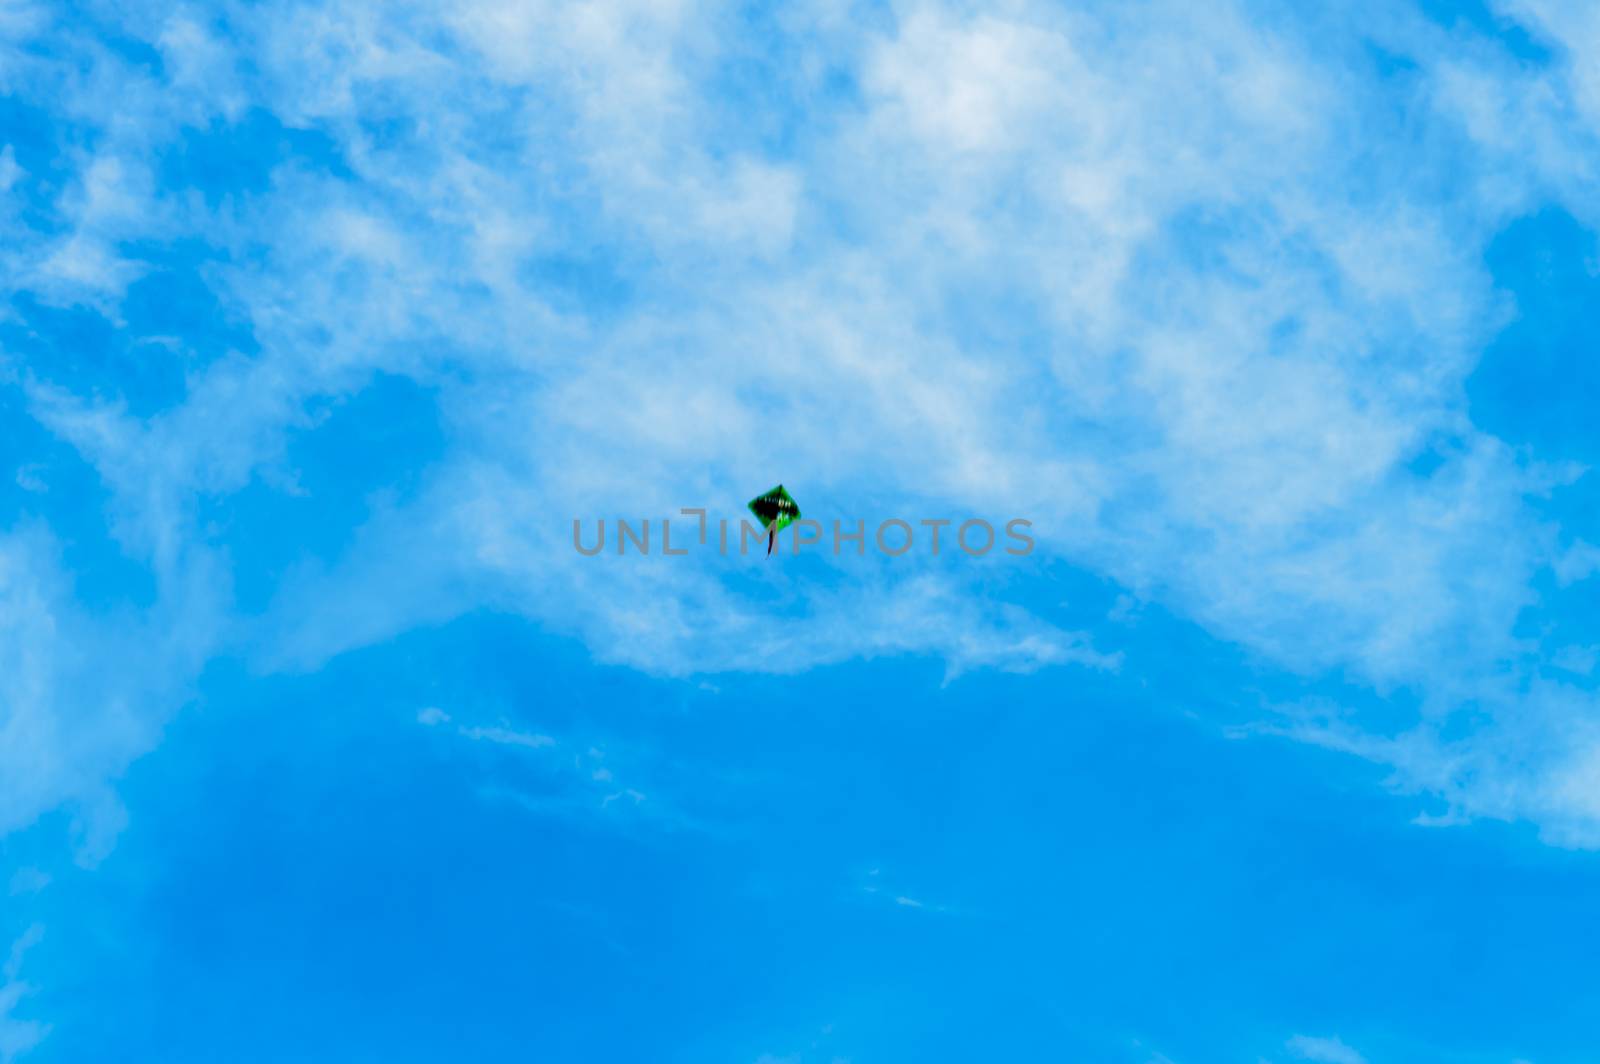 Kite flying in the sky. Kites flying picture with blue sky and white clouds. Photography in the eve of Vishwakarma Puja in Kolkata. Low angel View. Motion Blur. by sudiptabhowmick